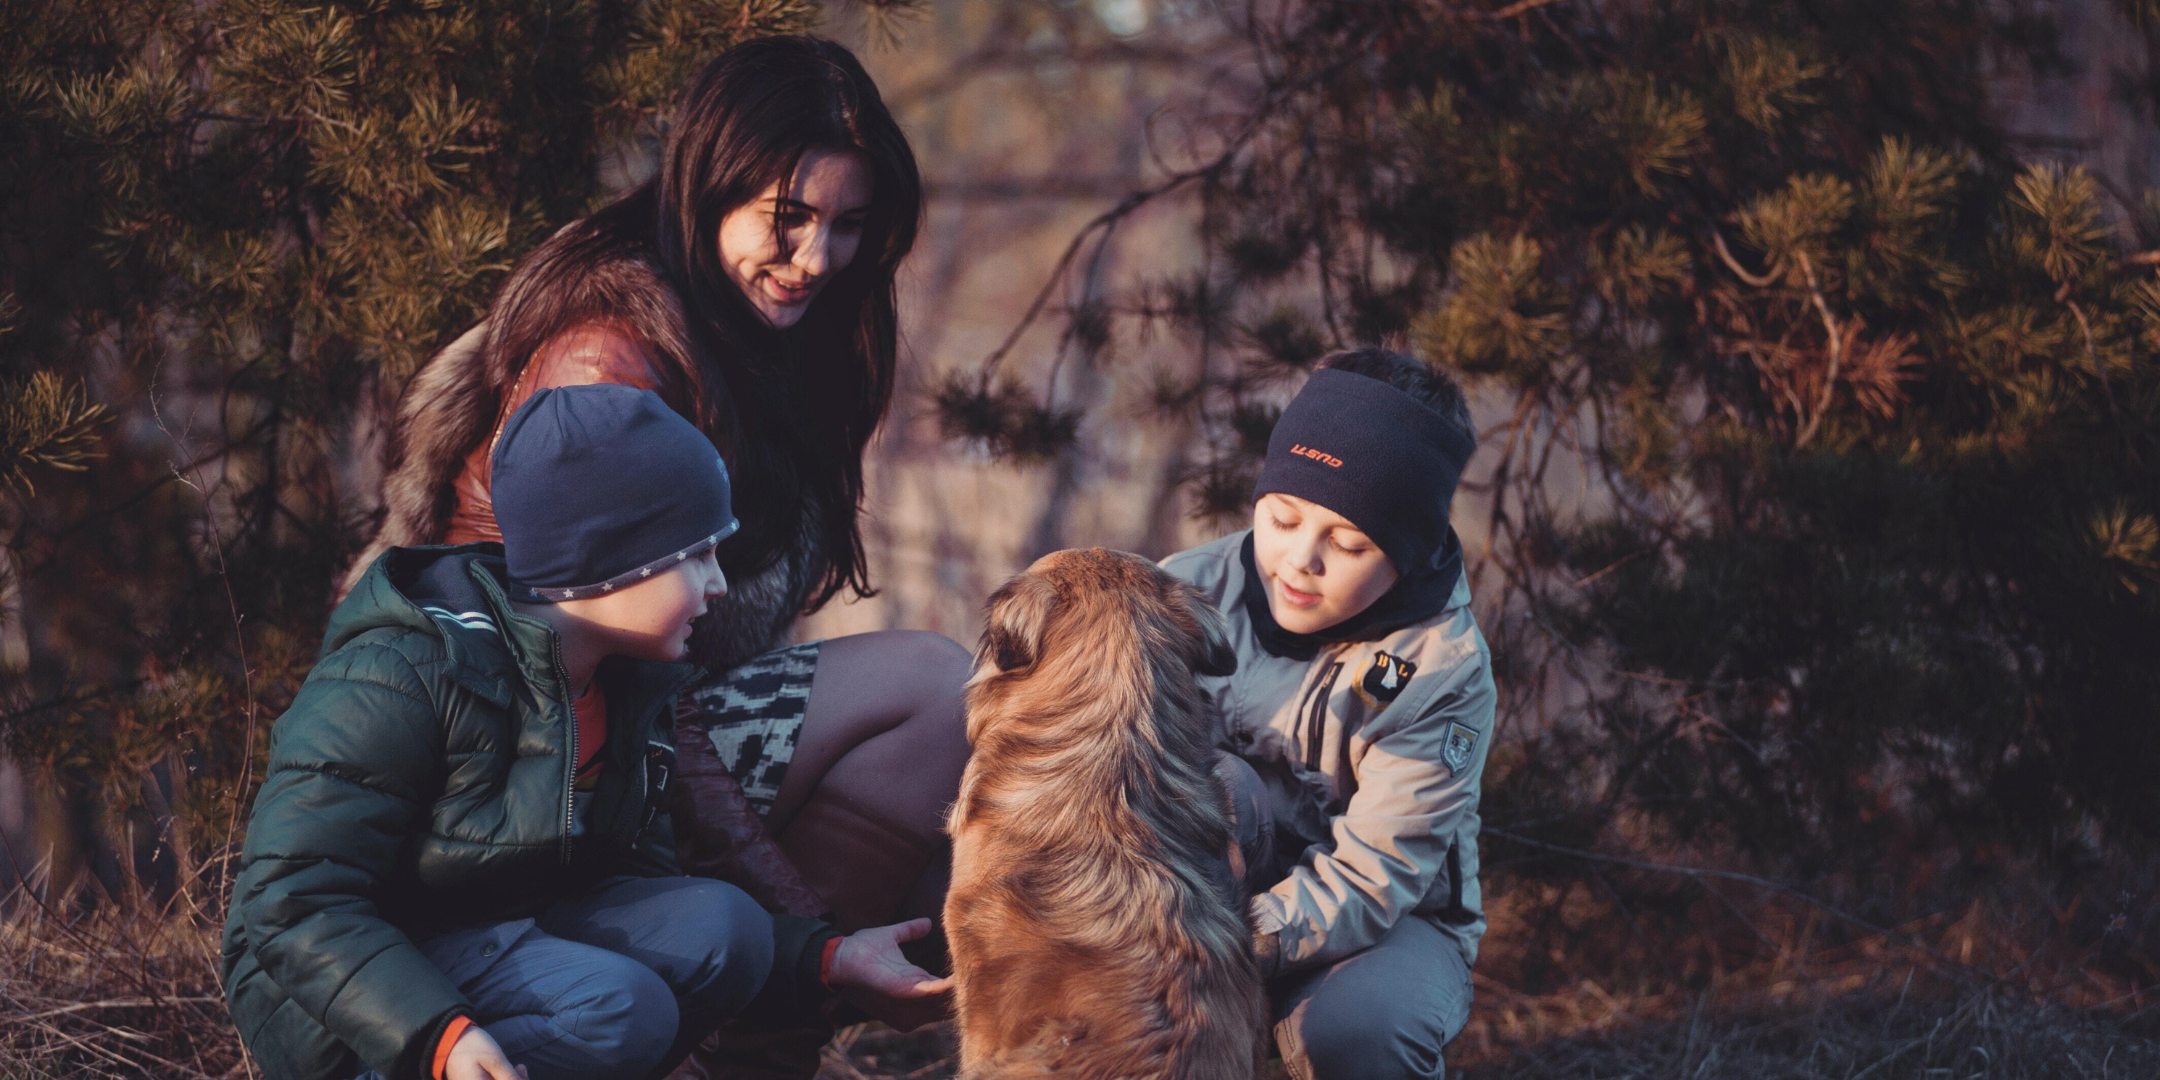 A woman and two boys play with a dog